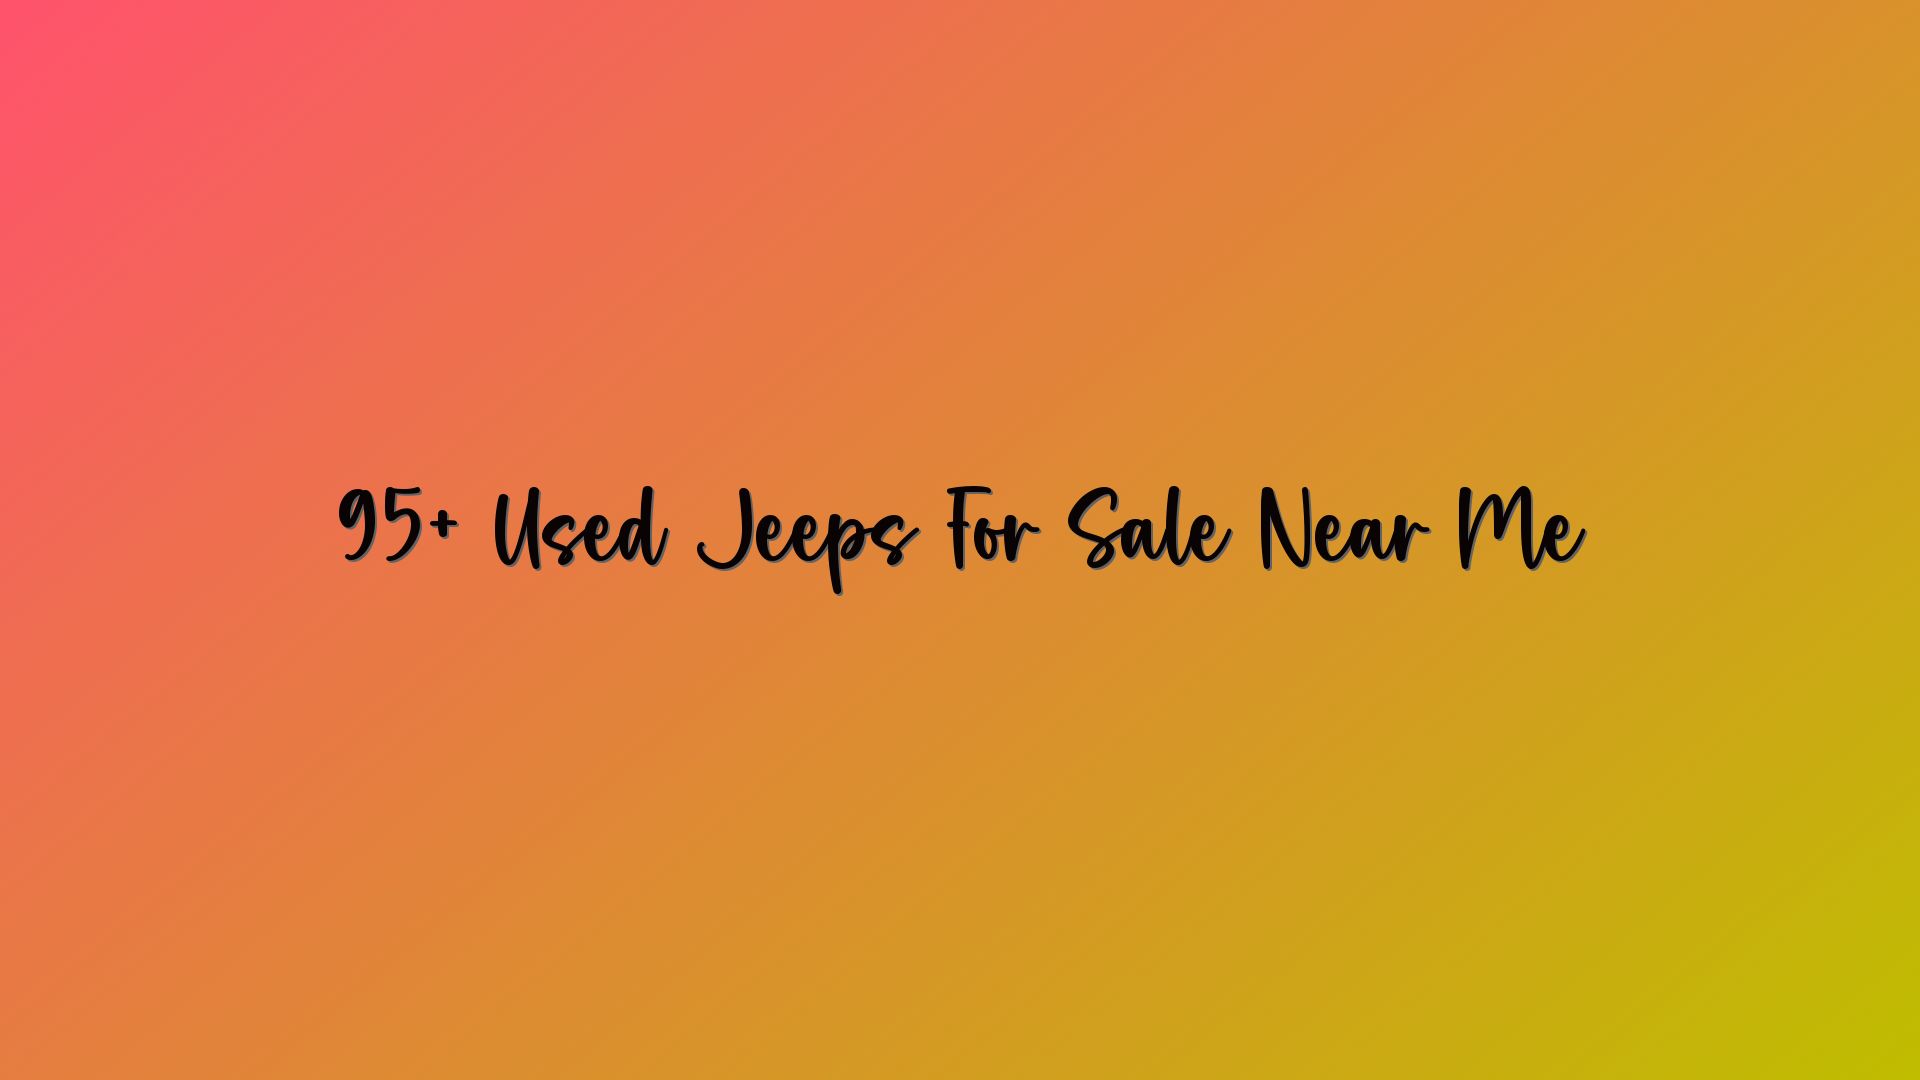 95+ Used Jeeps For Sale Near Me